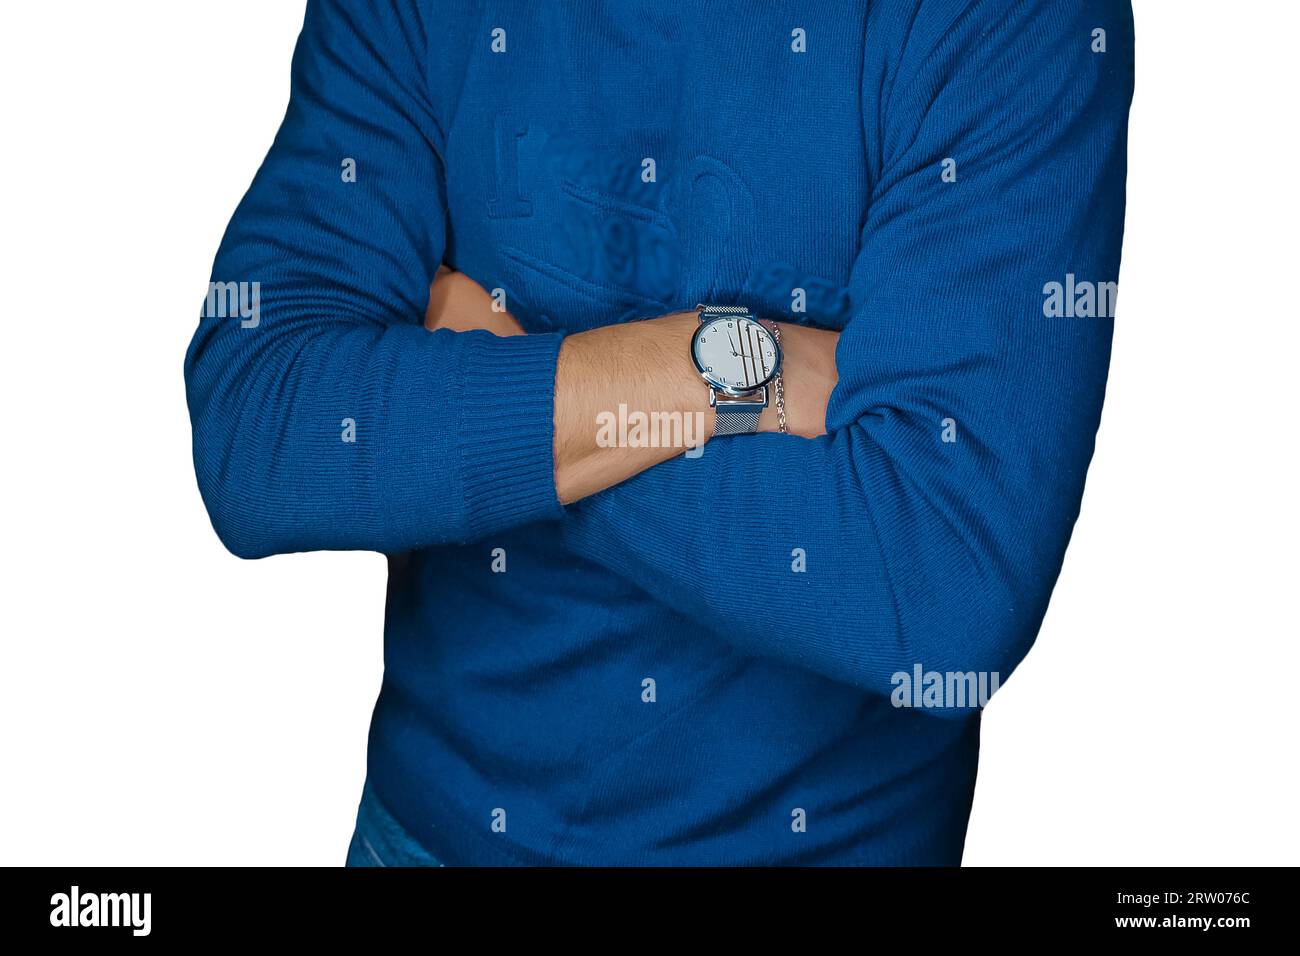 Man posing idly by with a wristwatch in a blue sweater, fashion style clothing white isolated background. Stock Photo